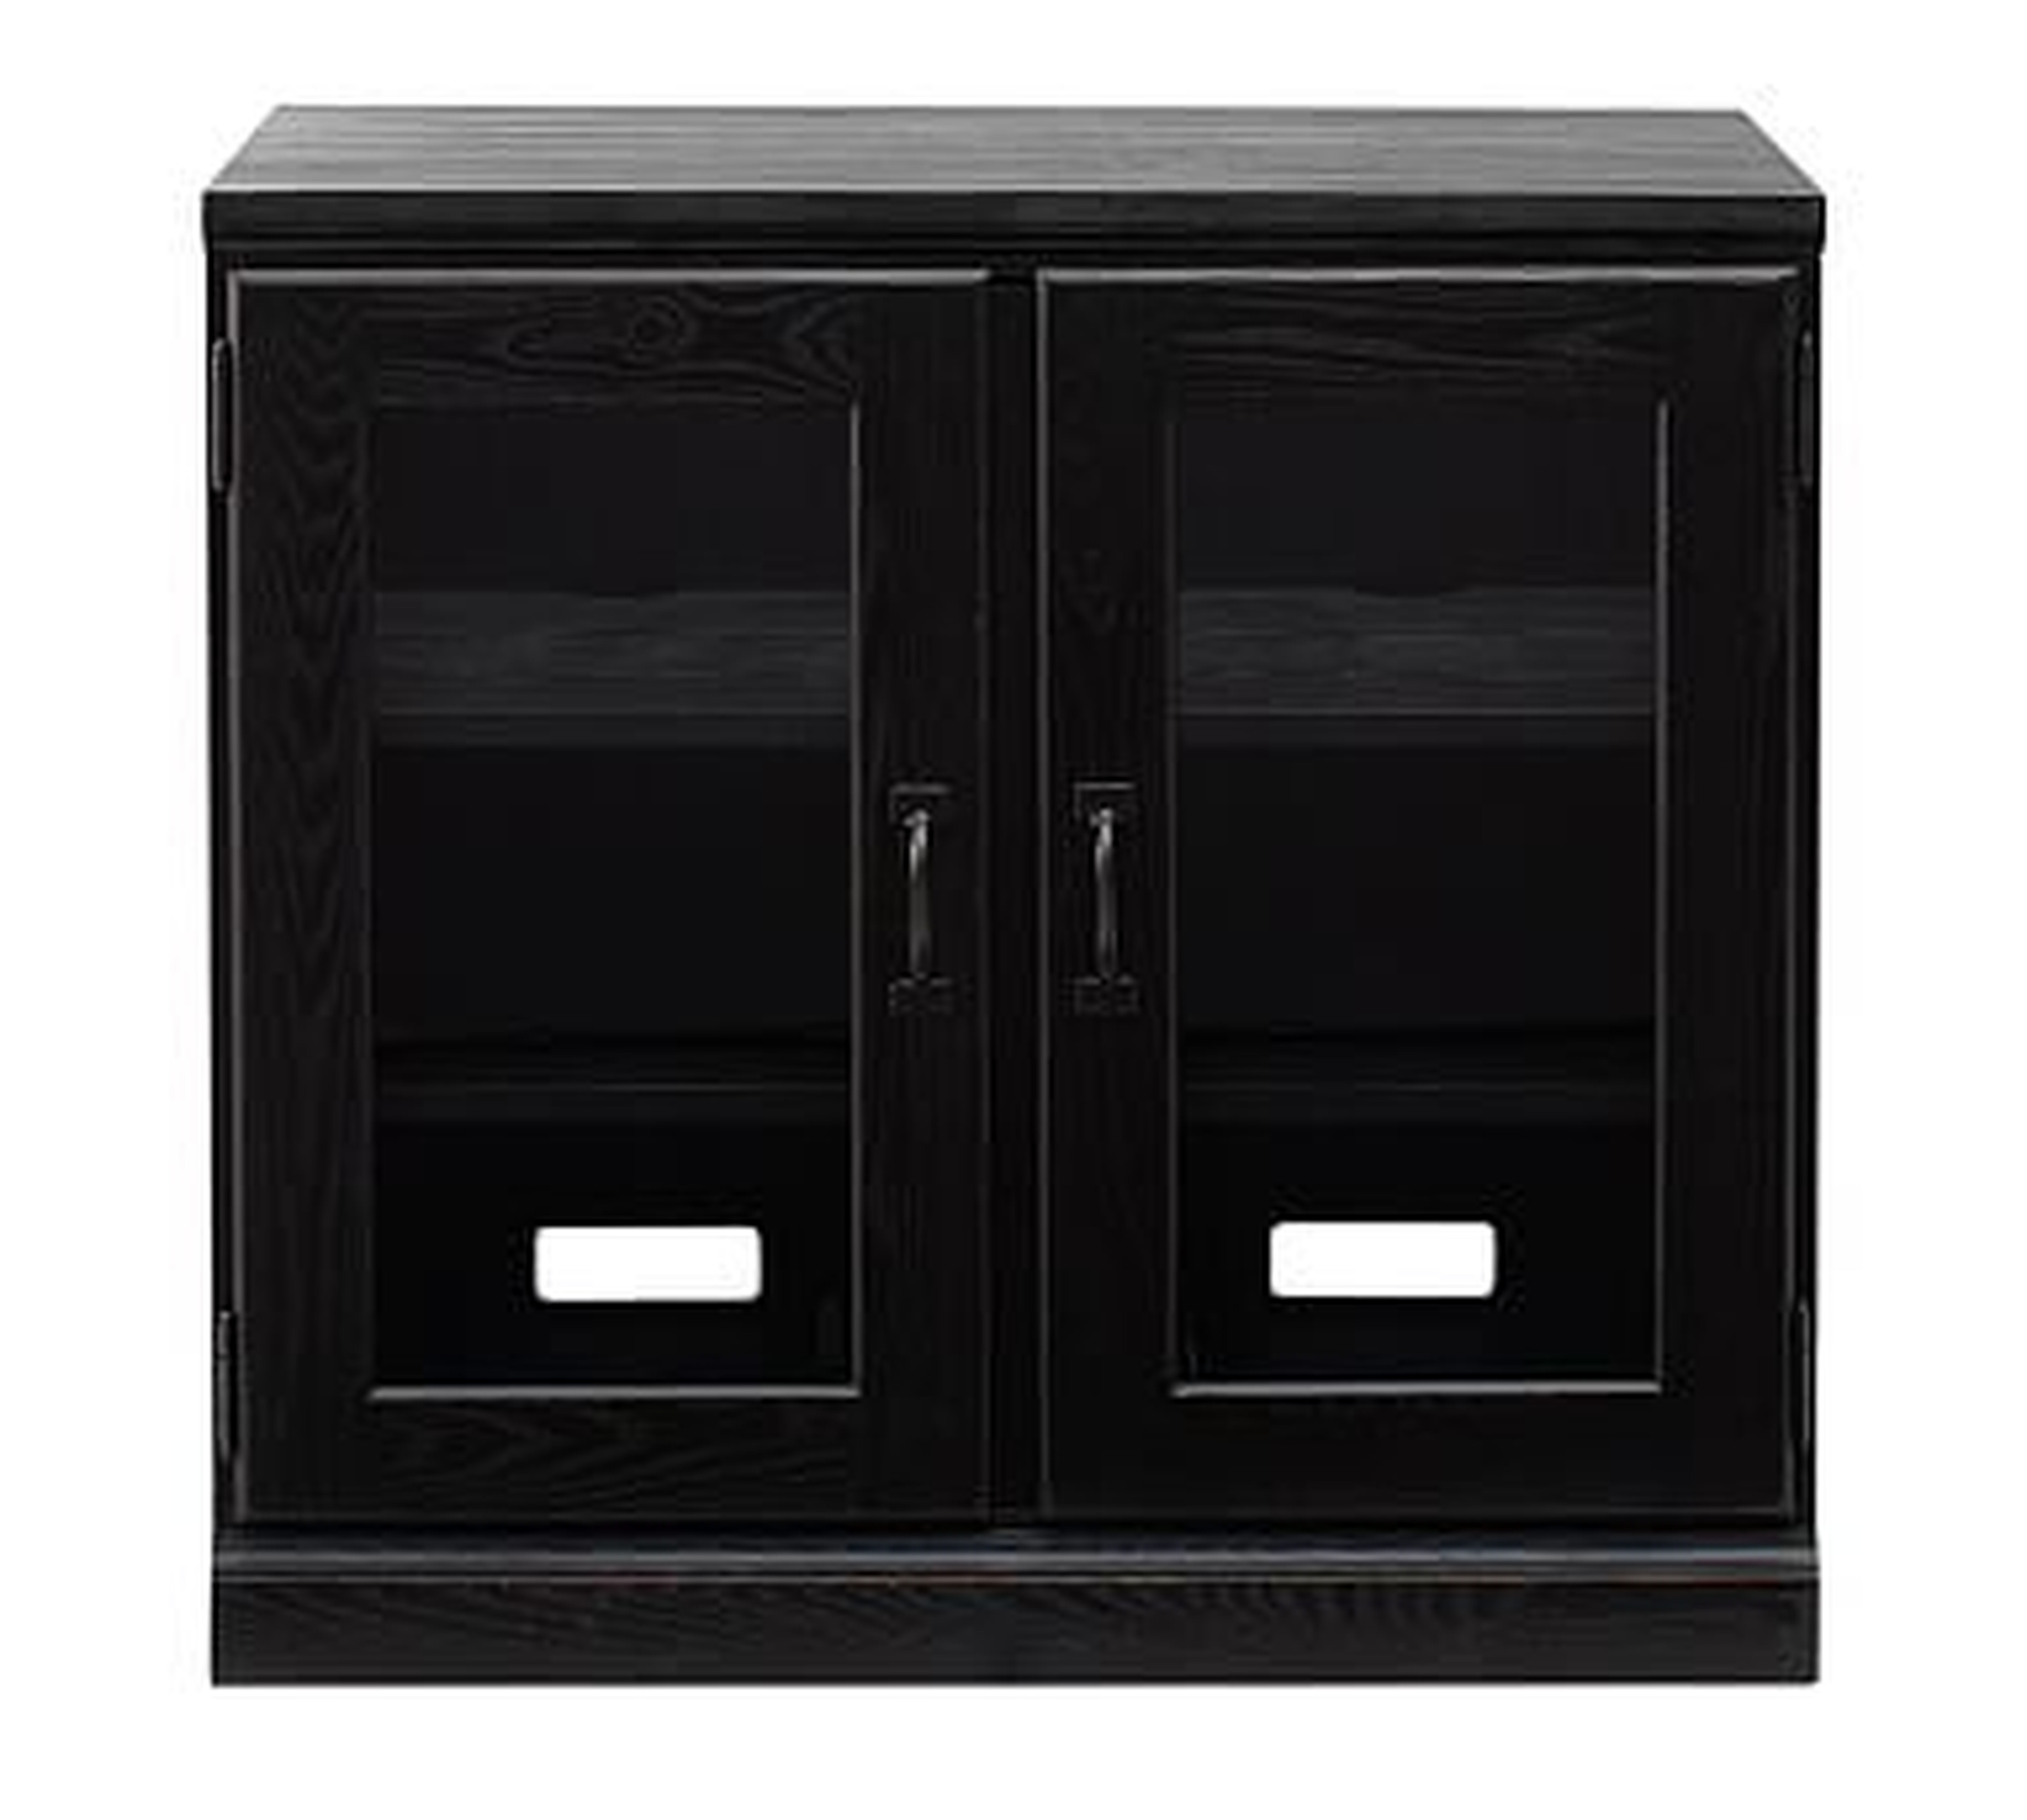 Printer's Double Glass Door Cabinet w/Double Top, Artisanal Black stain - Pottery Barn